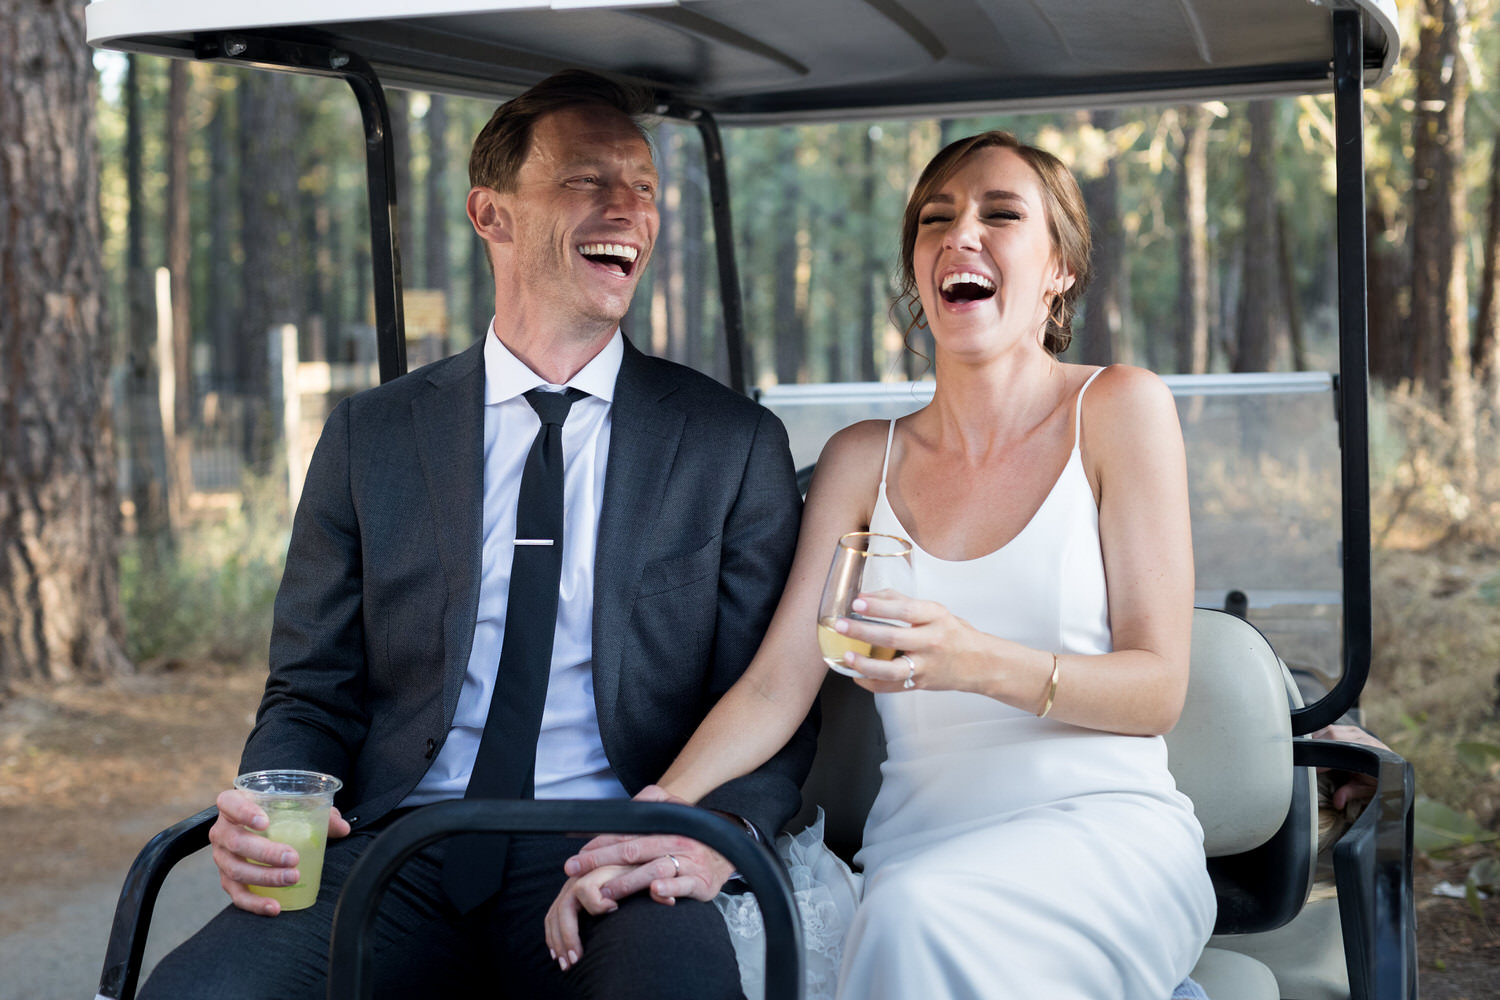 The bride and groom ride in a golf cart for their sunset photos at Chalet View Lodge.